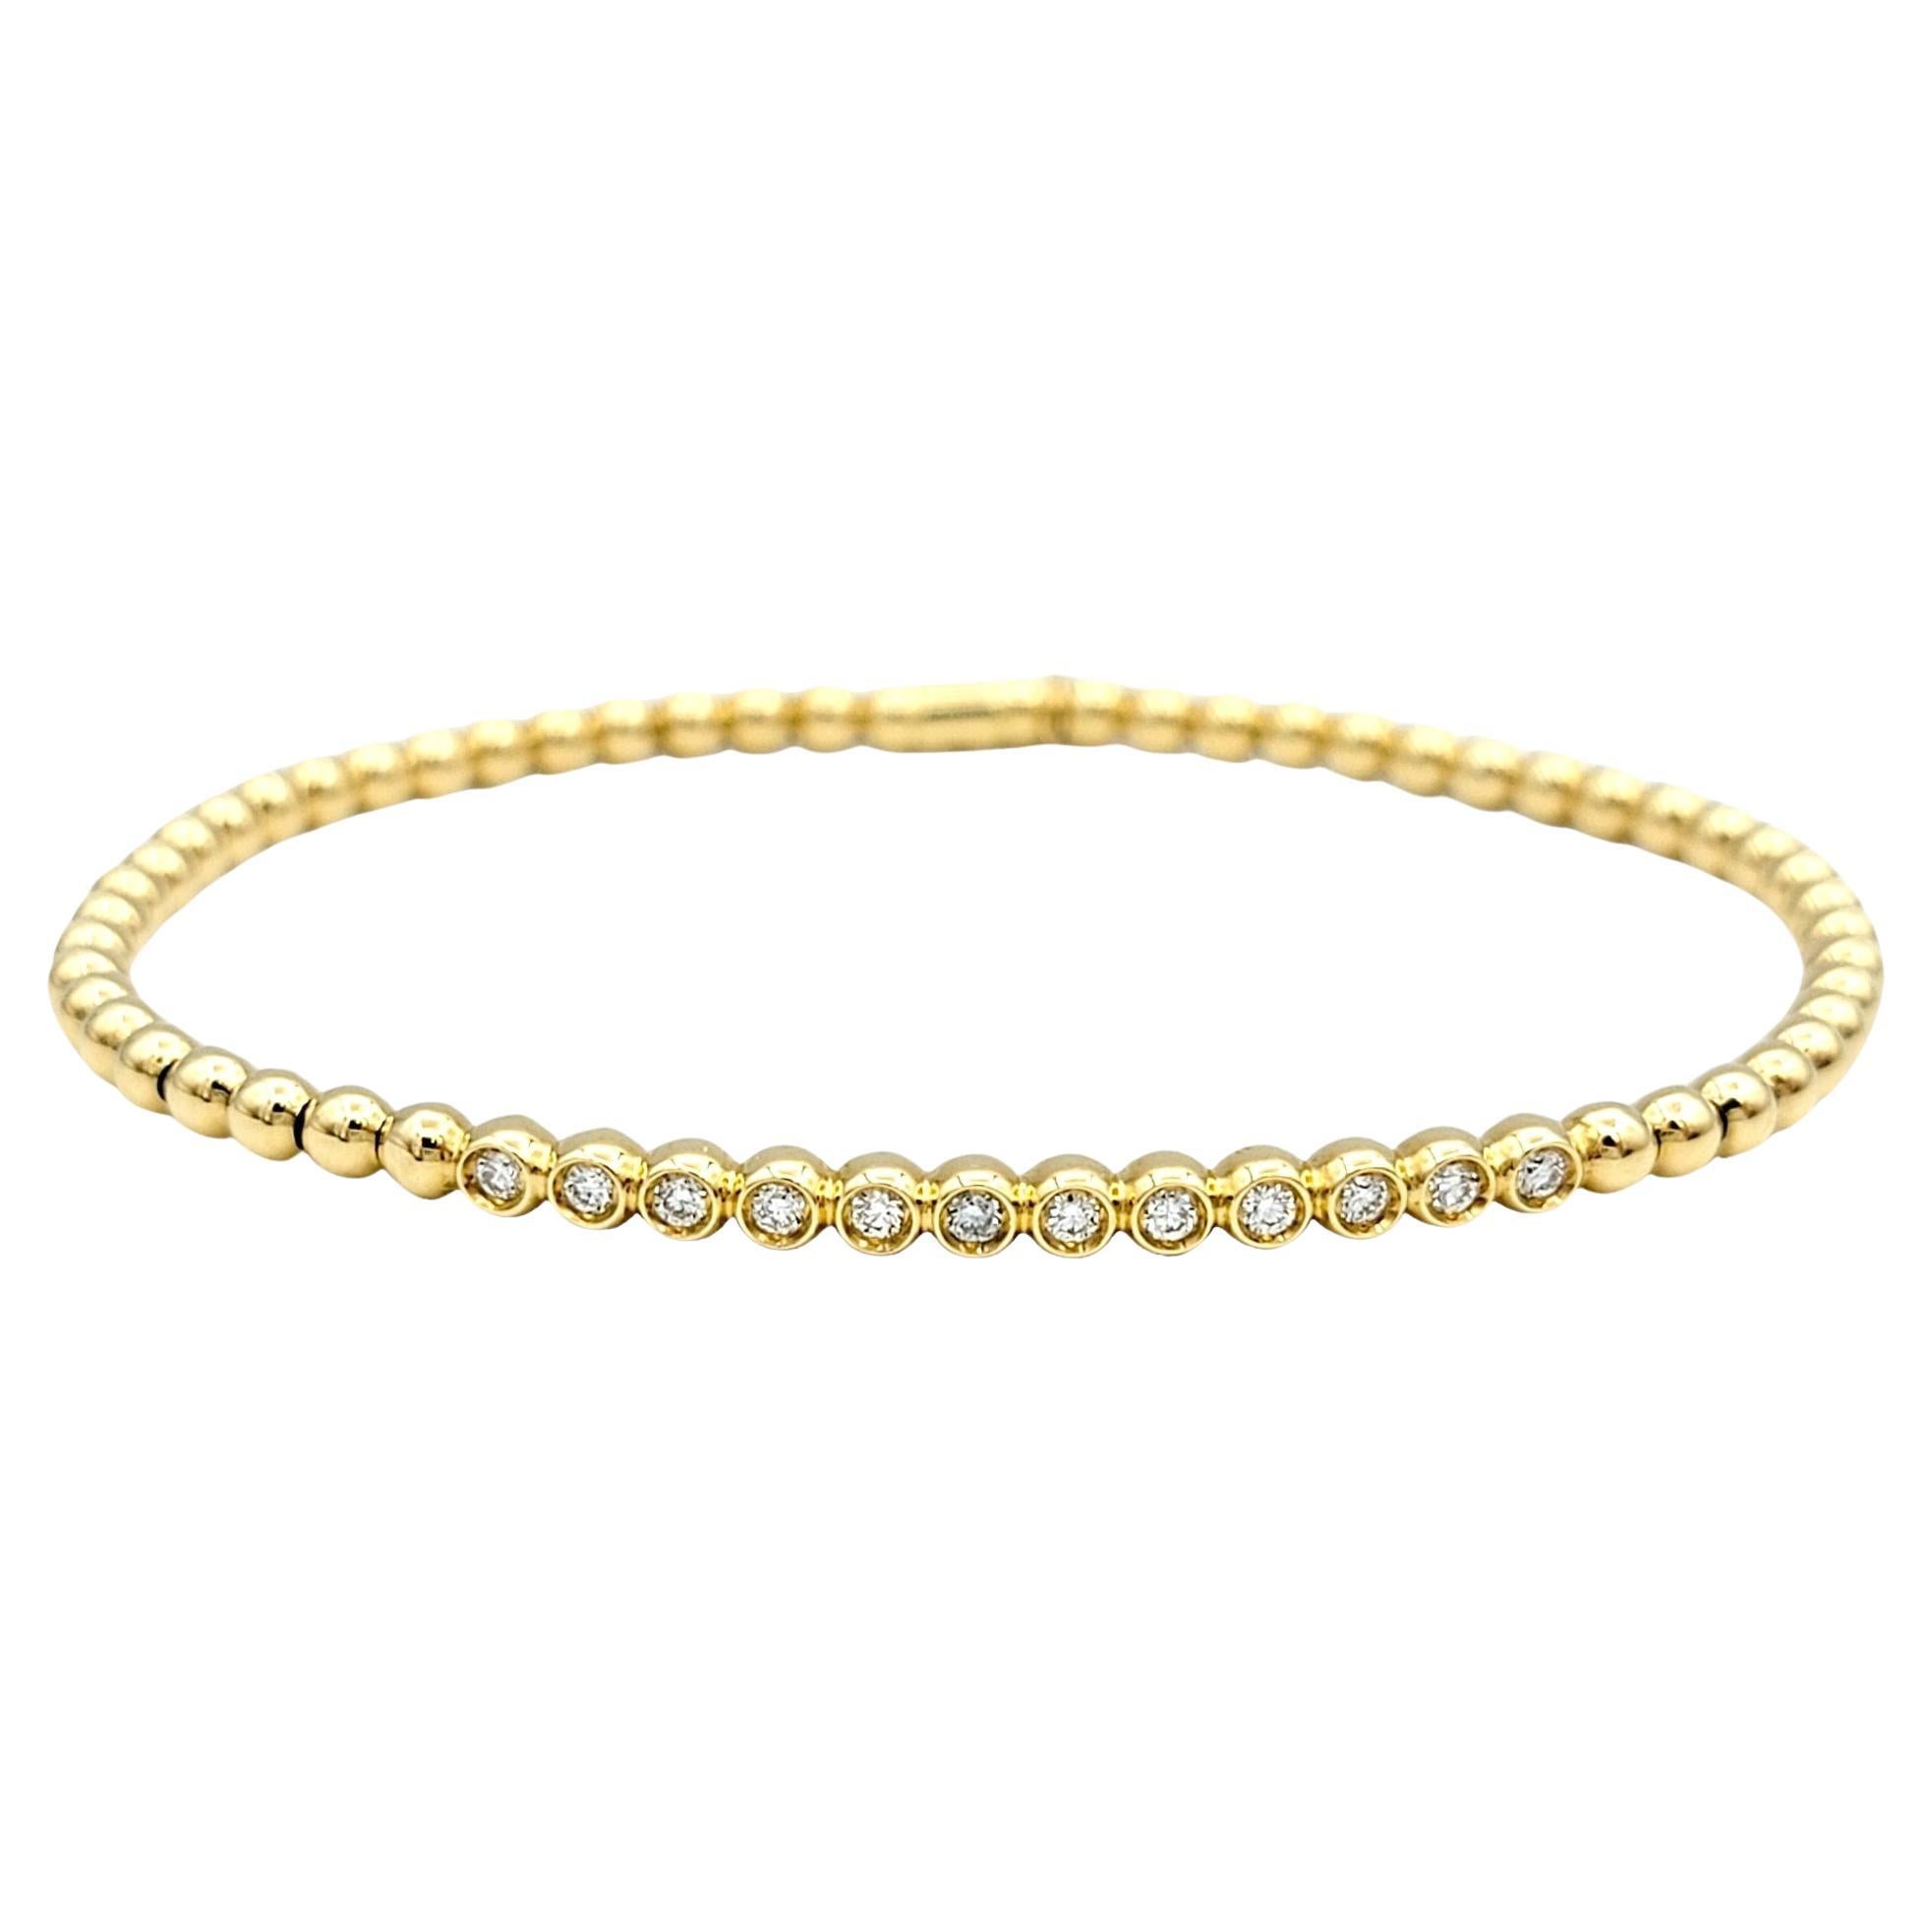 Hulchi Belluni Tresore Collection 3mm Stretch Bracelet Yellow Gold and Diamonds For Sale